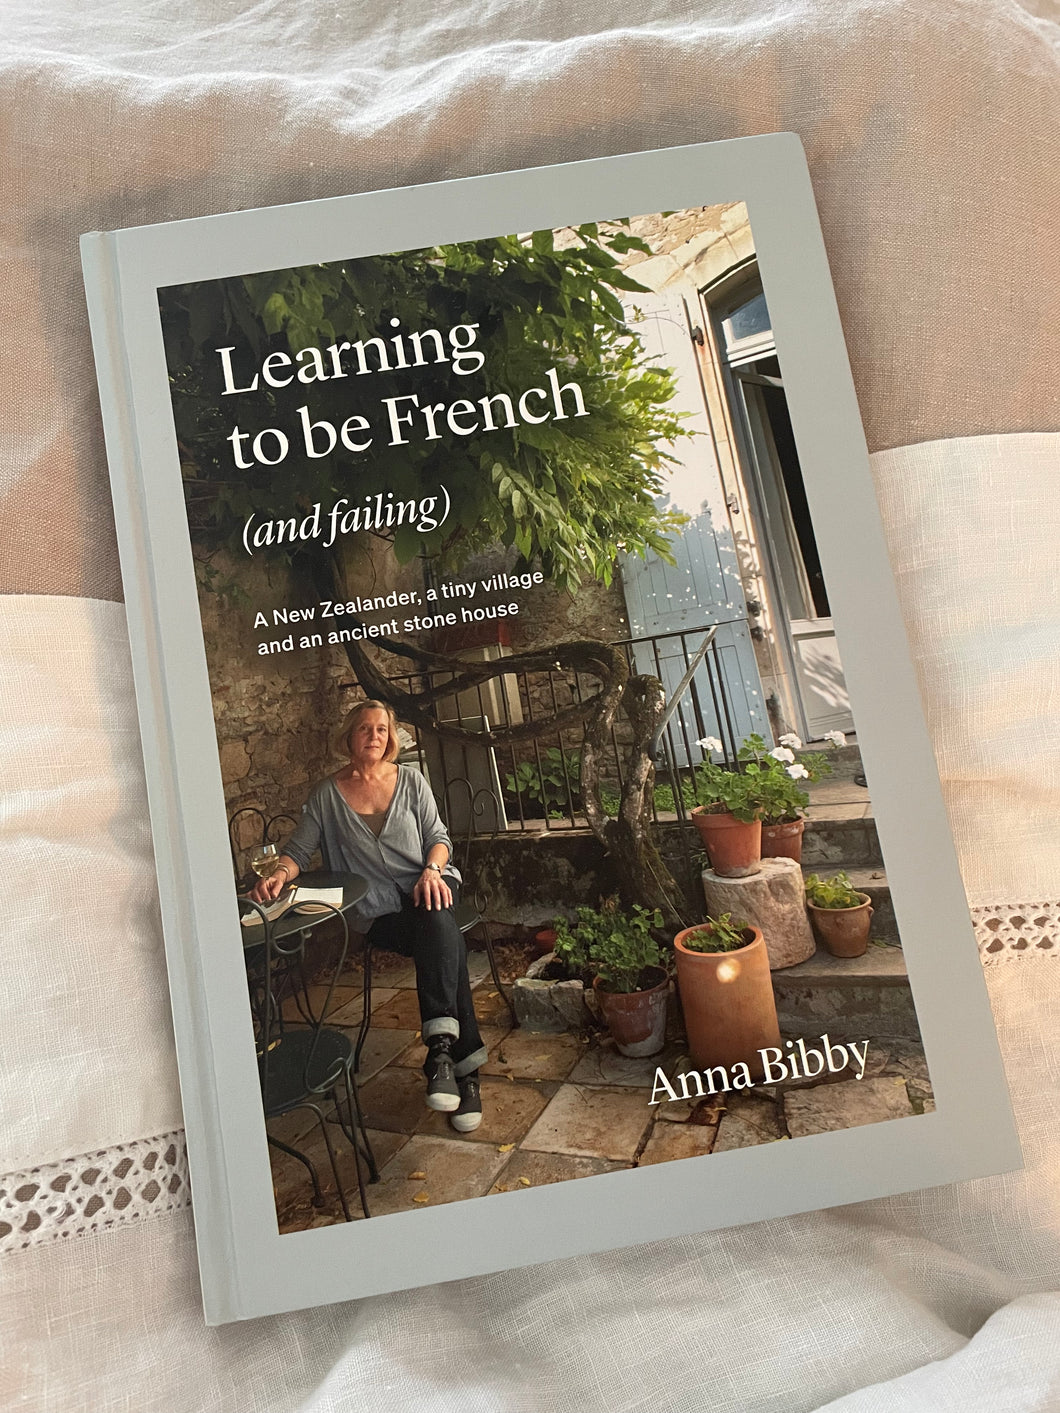 Learning To Be French (and failing) by Anna Bibby